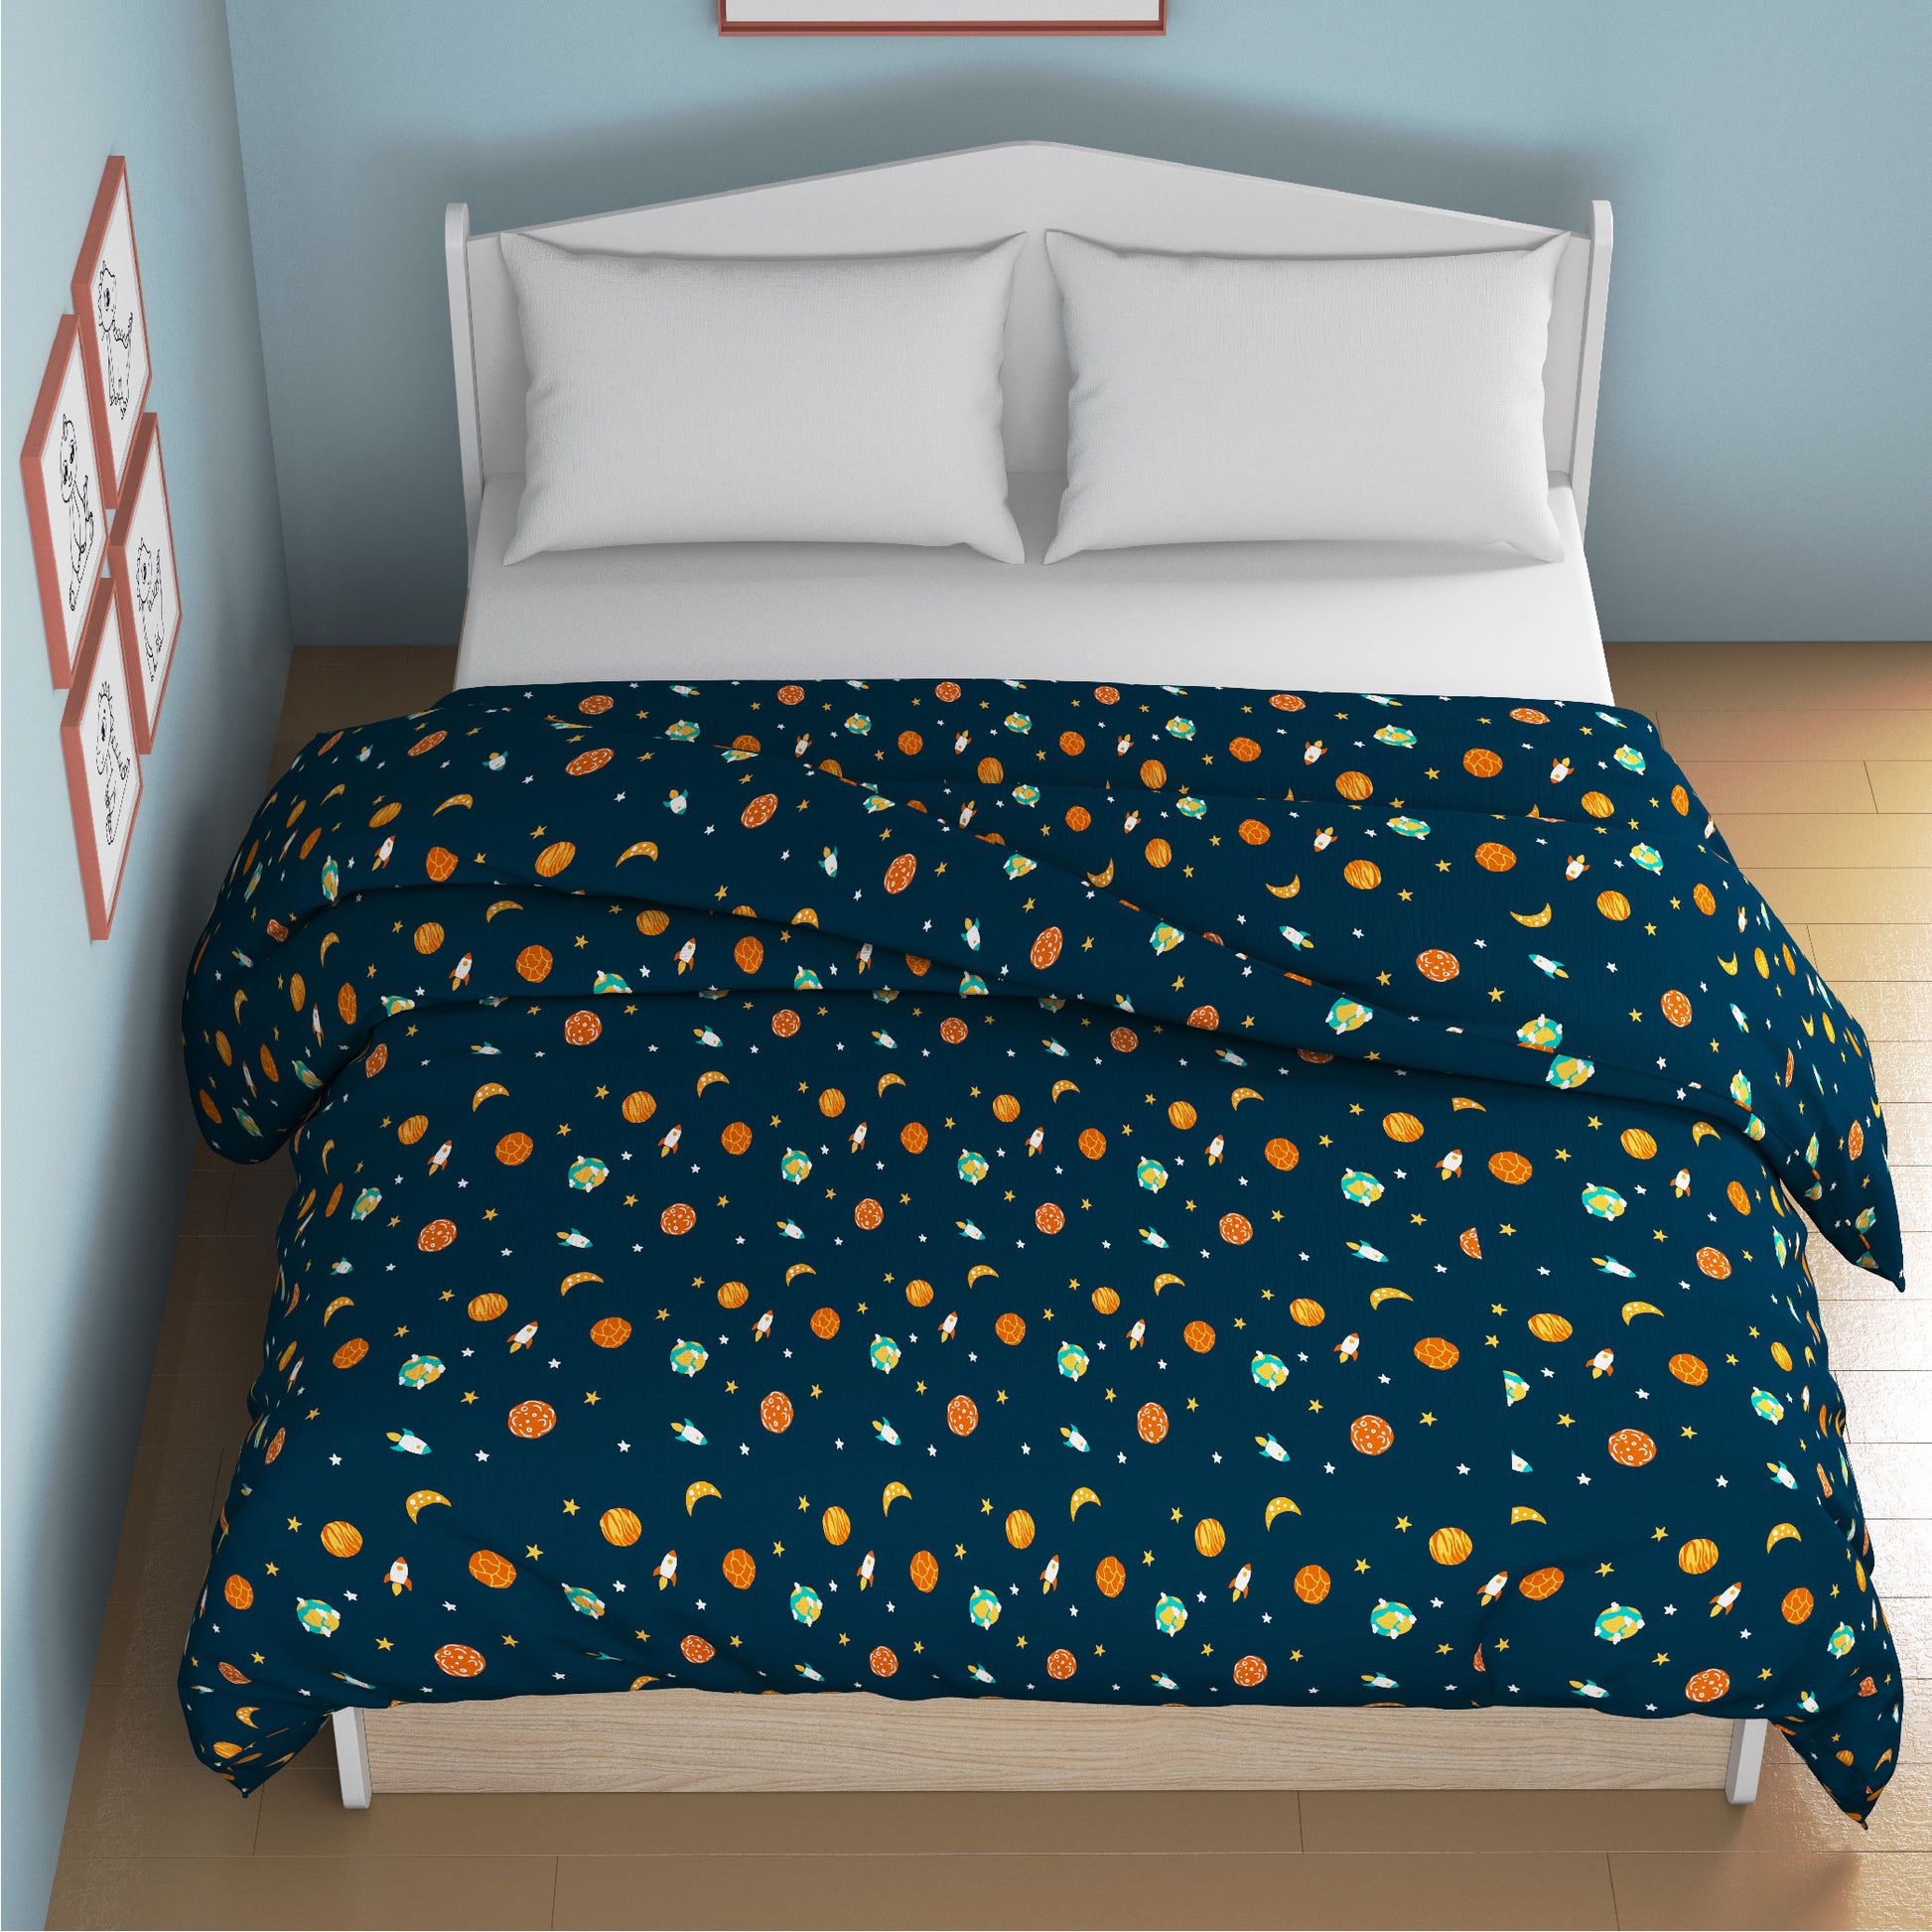 media_gallary Astronuts Dohar Queen Bed Size 2